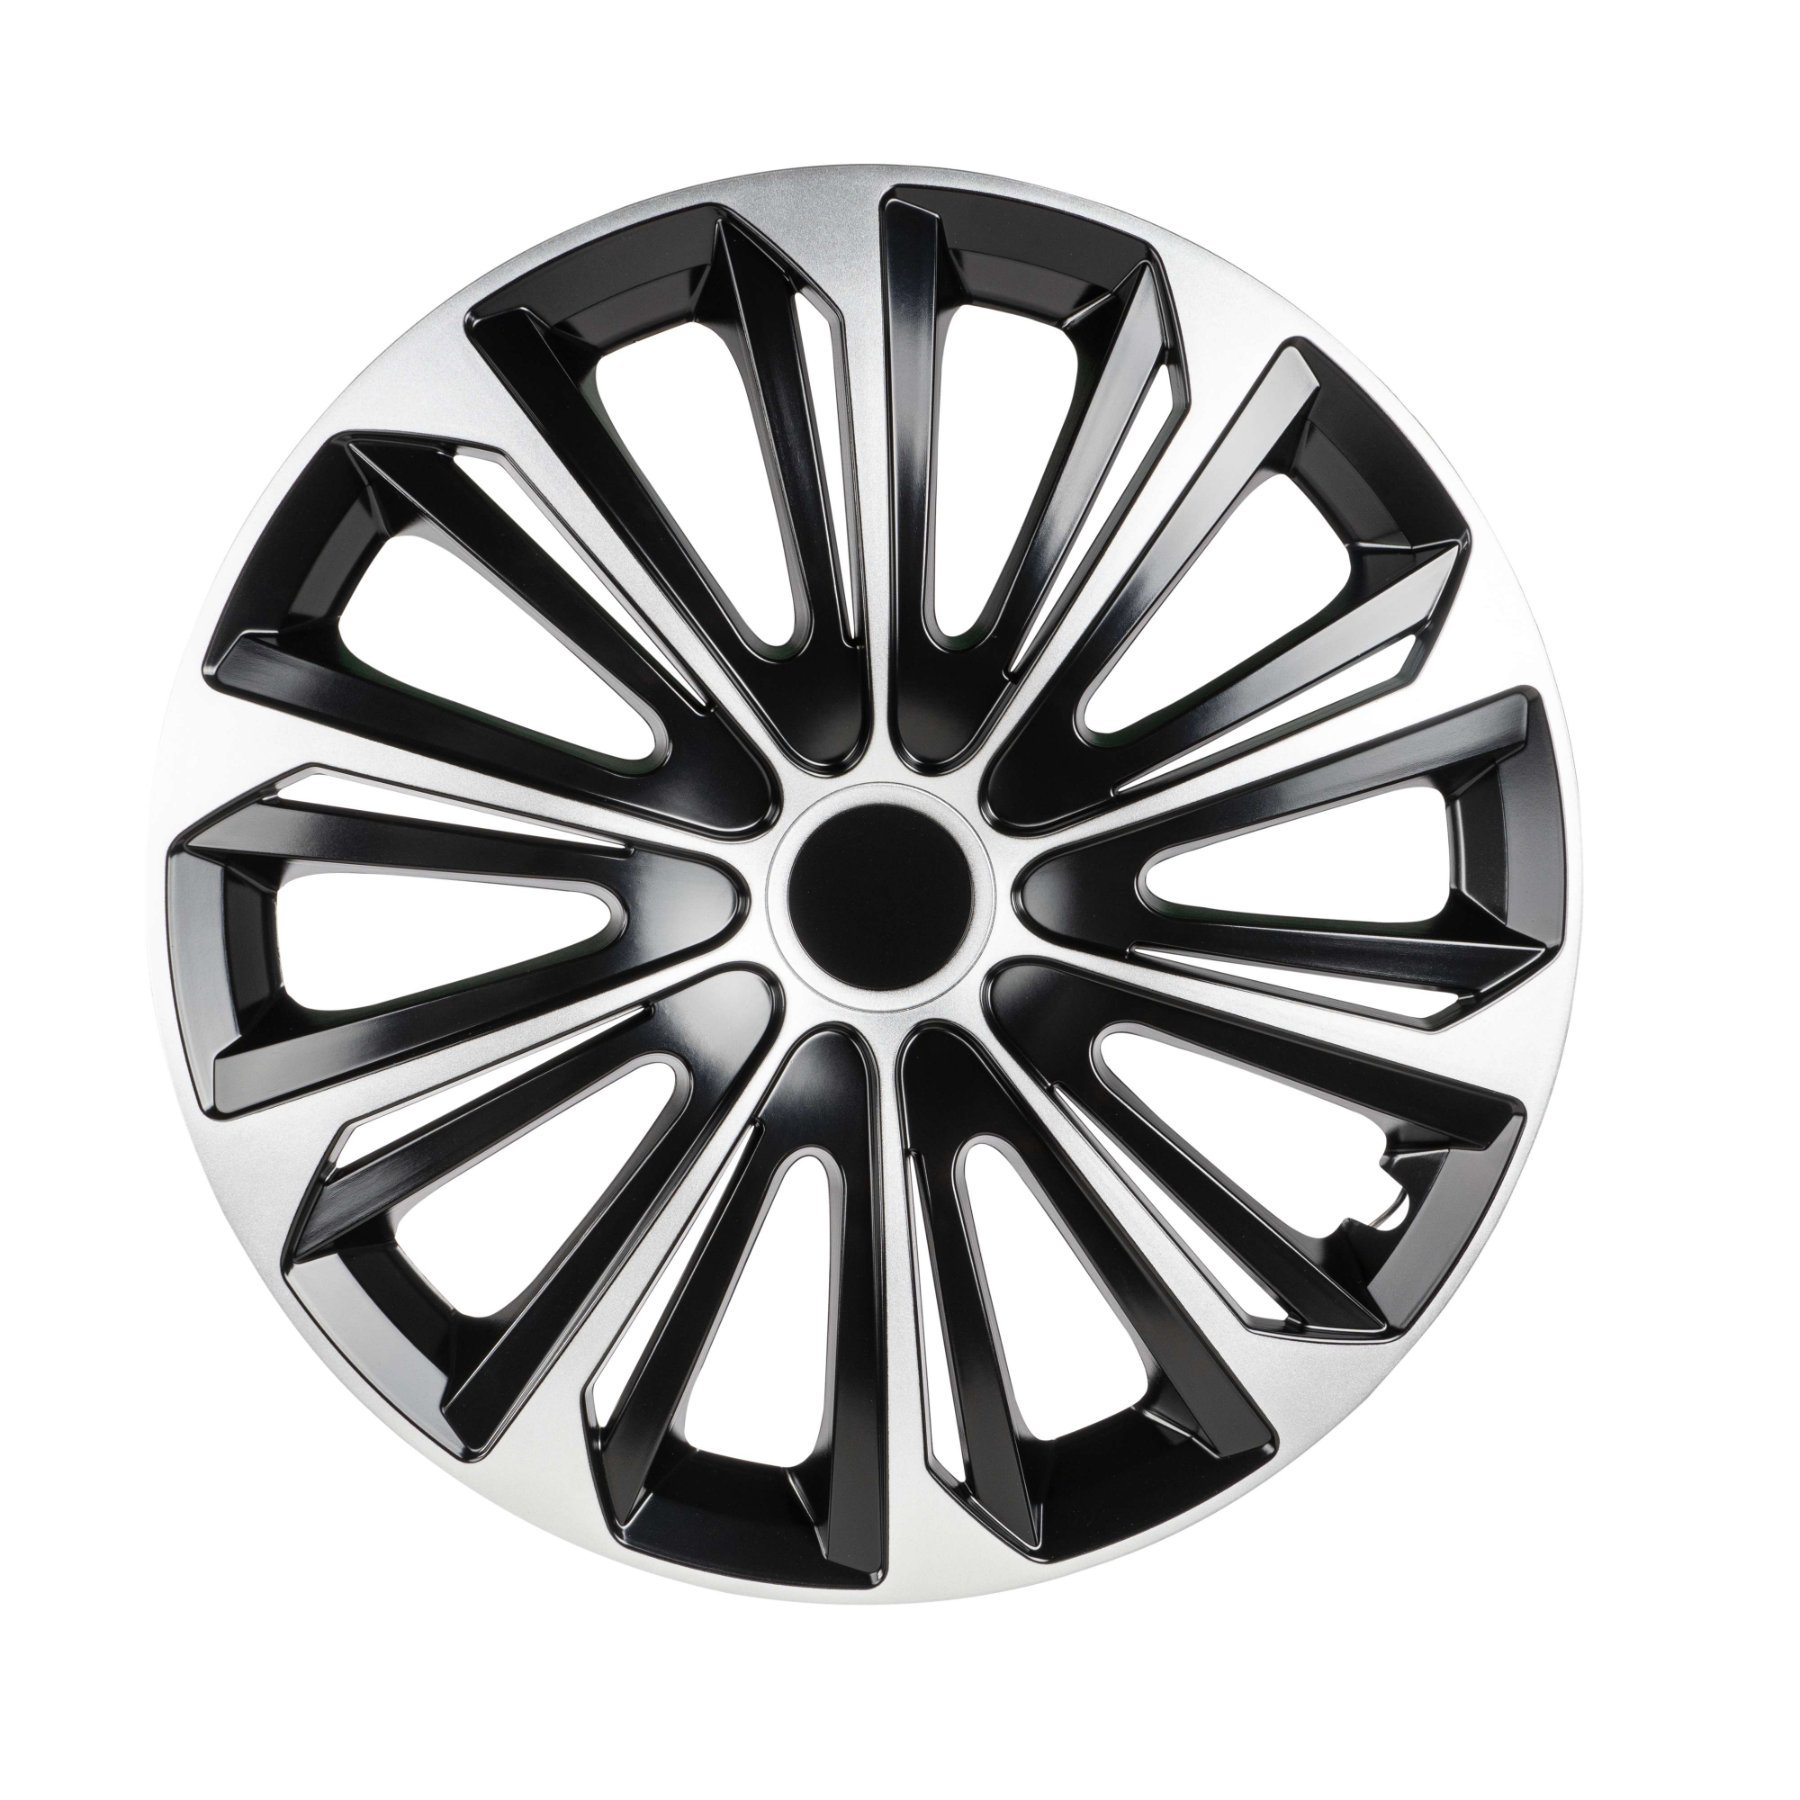 Wheel covers New Racer 16", 4 piece black/silver